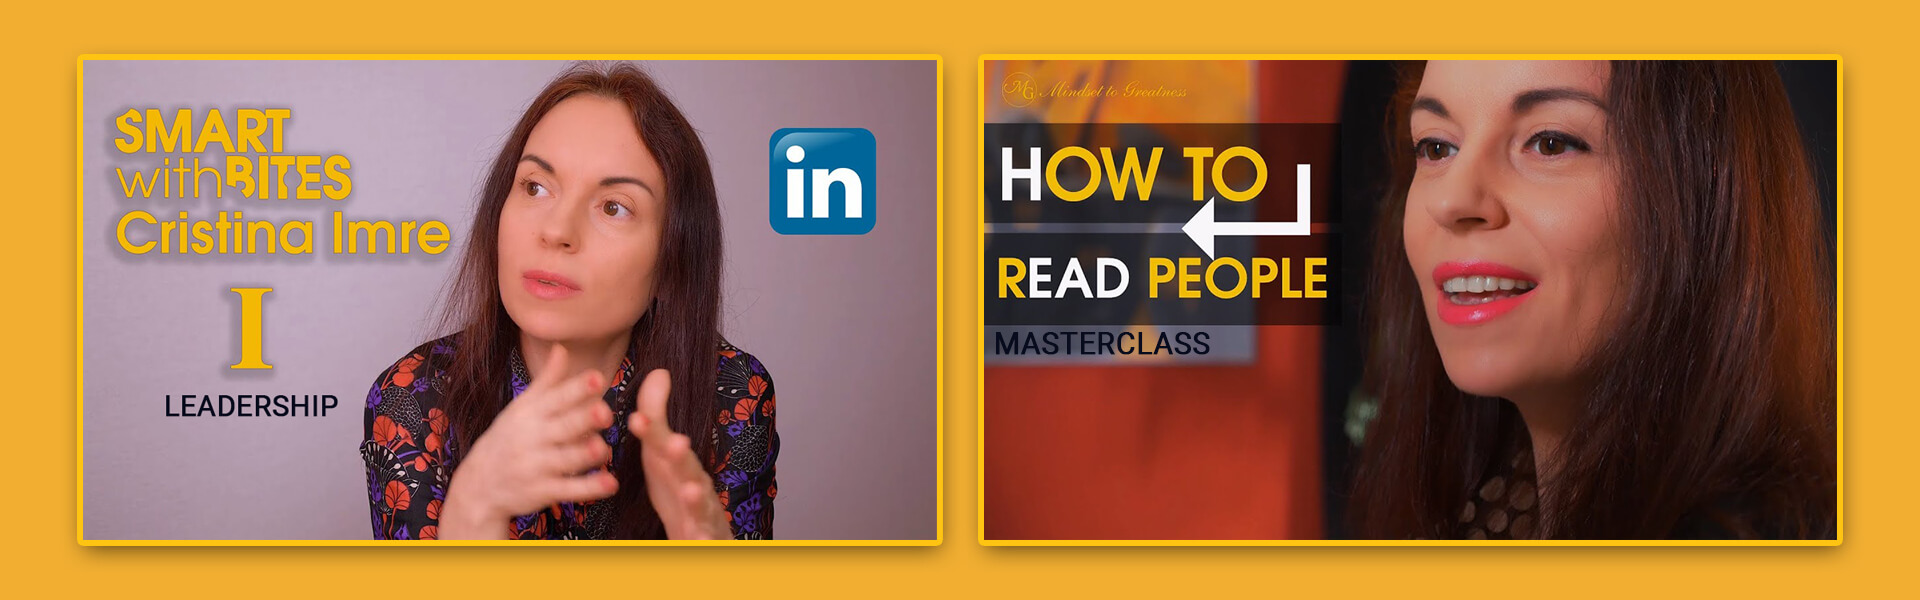 how to read people cristina imre